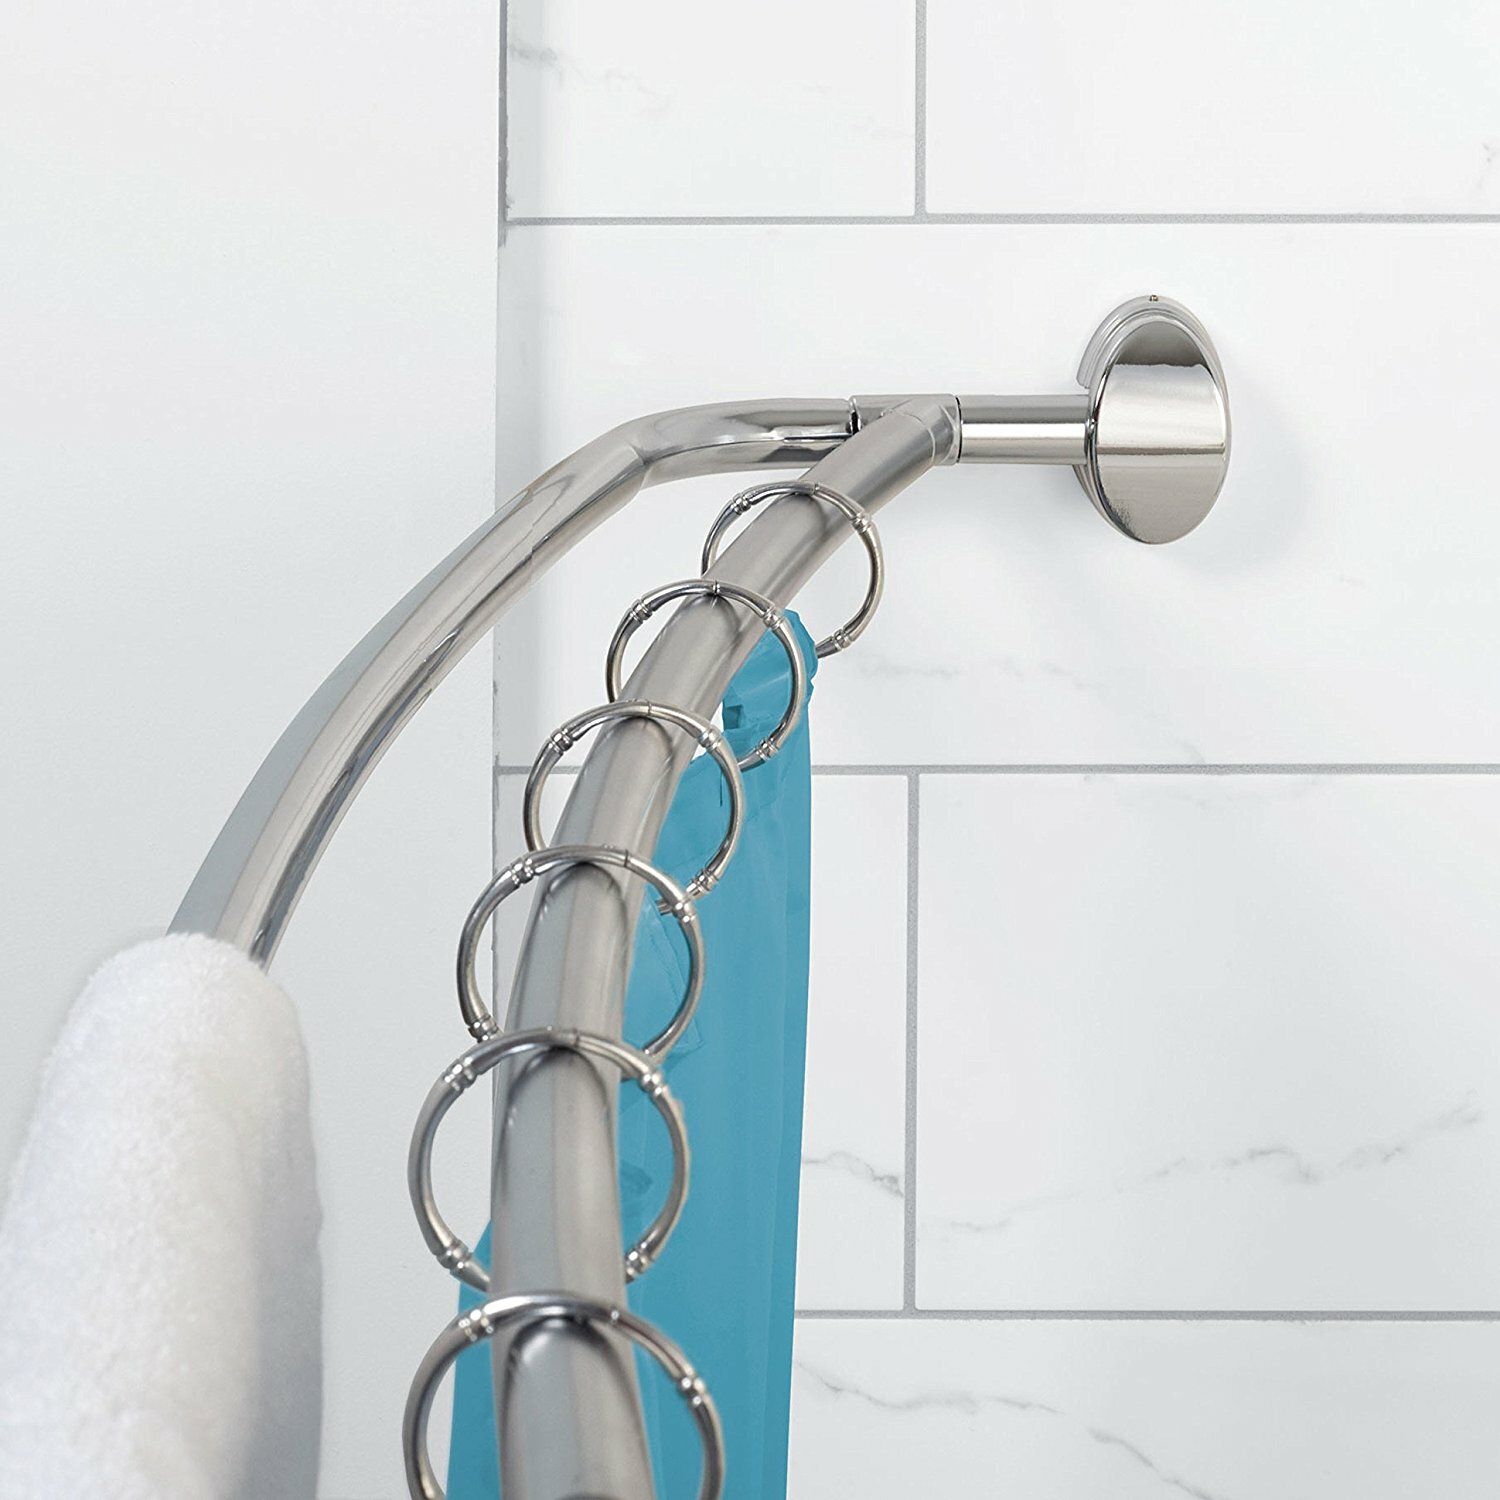 Shower Curtain Tension Rod | Tension Shower Rods | Stainless Steel Shower Curtain Rod